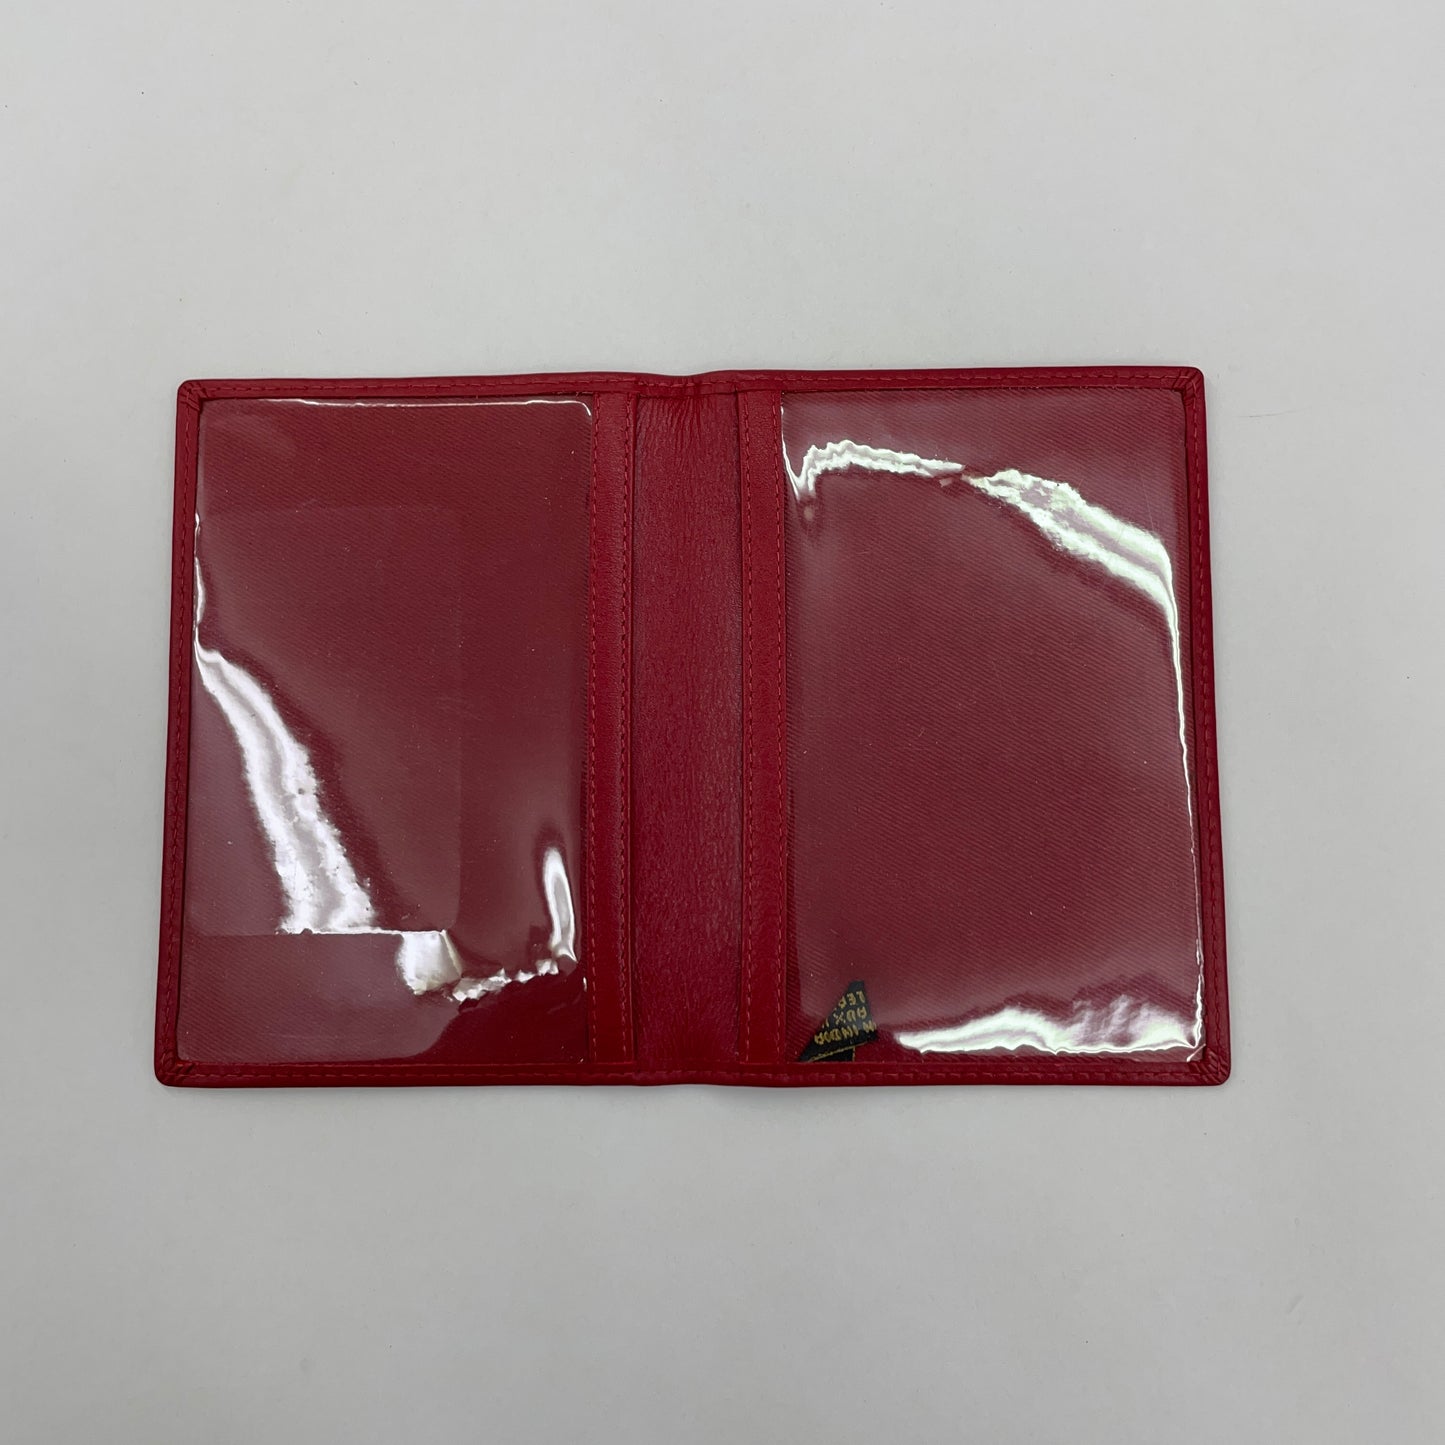 ORAN LEATHER RFID PASSPORT COVER RED